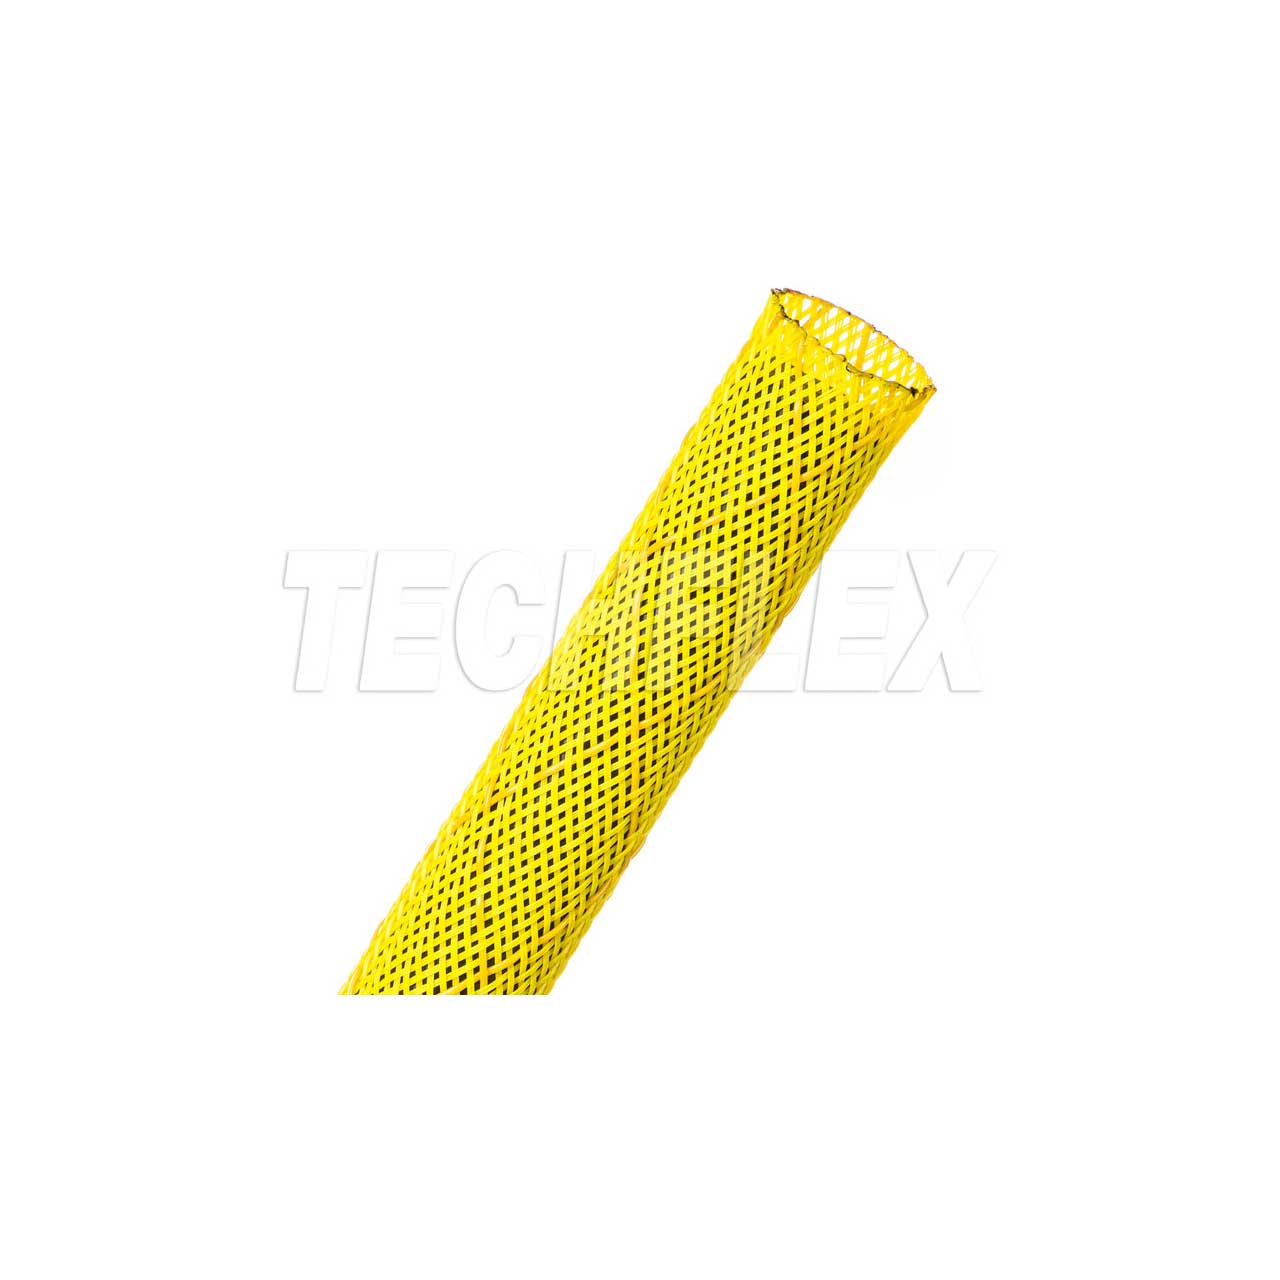 Techflex NSN0.75 Flexo Non-Skid High-Friction Polymer Combined with Standard PET Material - Neon Yellow - 100 Foot NSN0.75NY-100